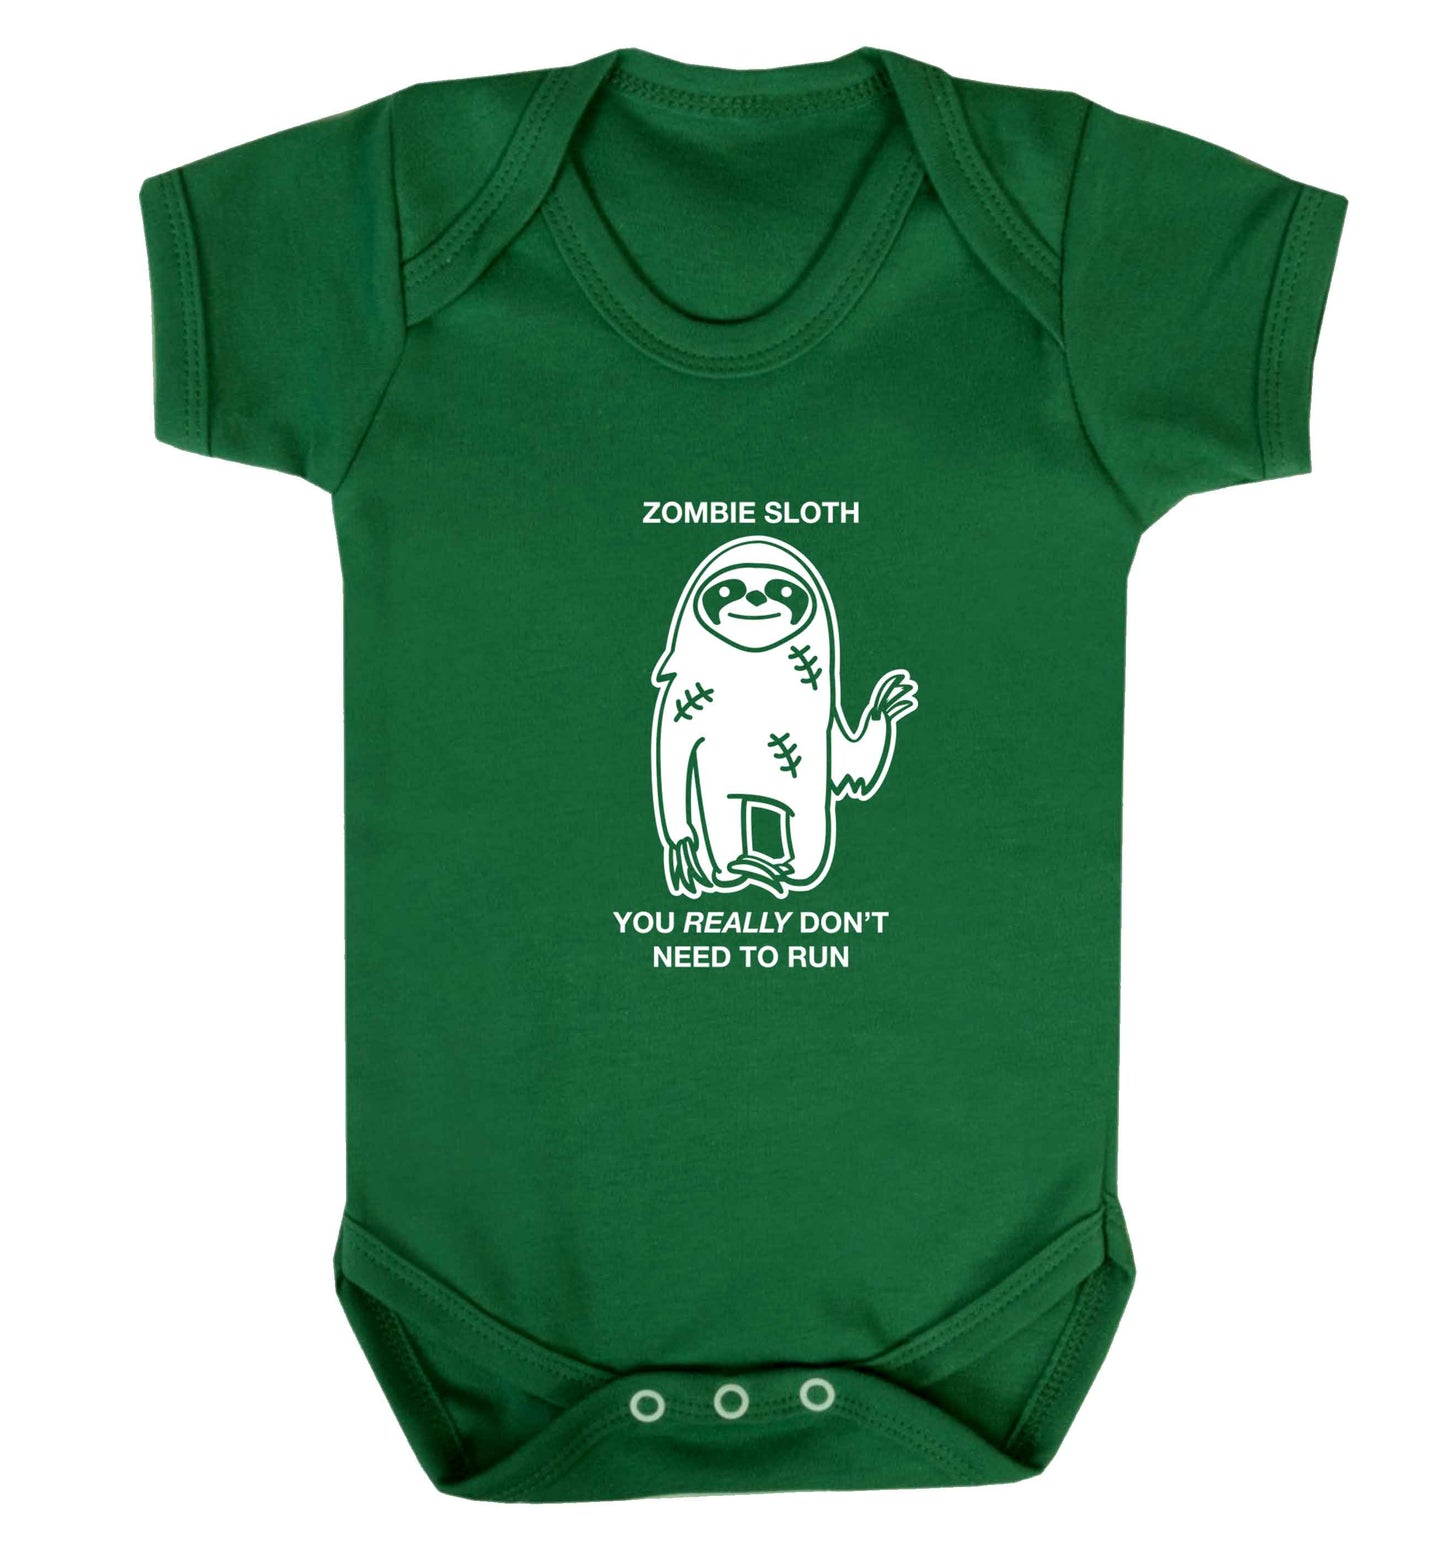 Zombie sloth you really don't need to run baby vest green 18-24 months